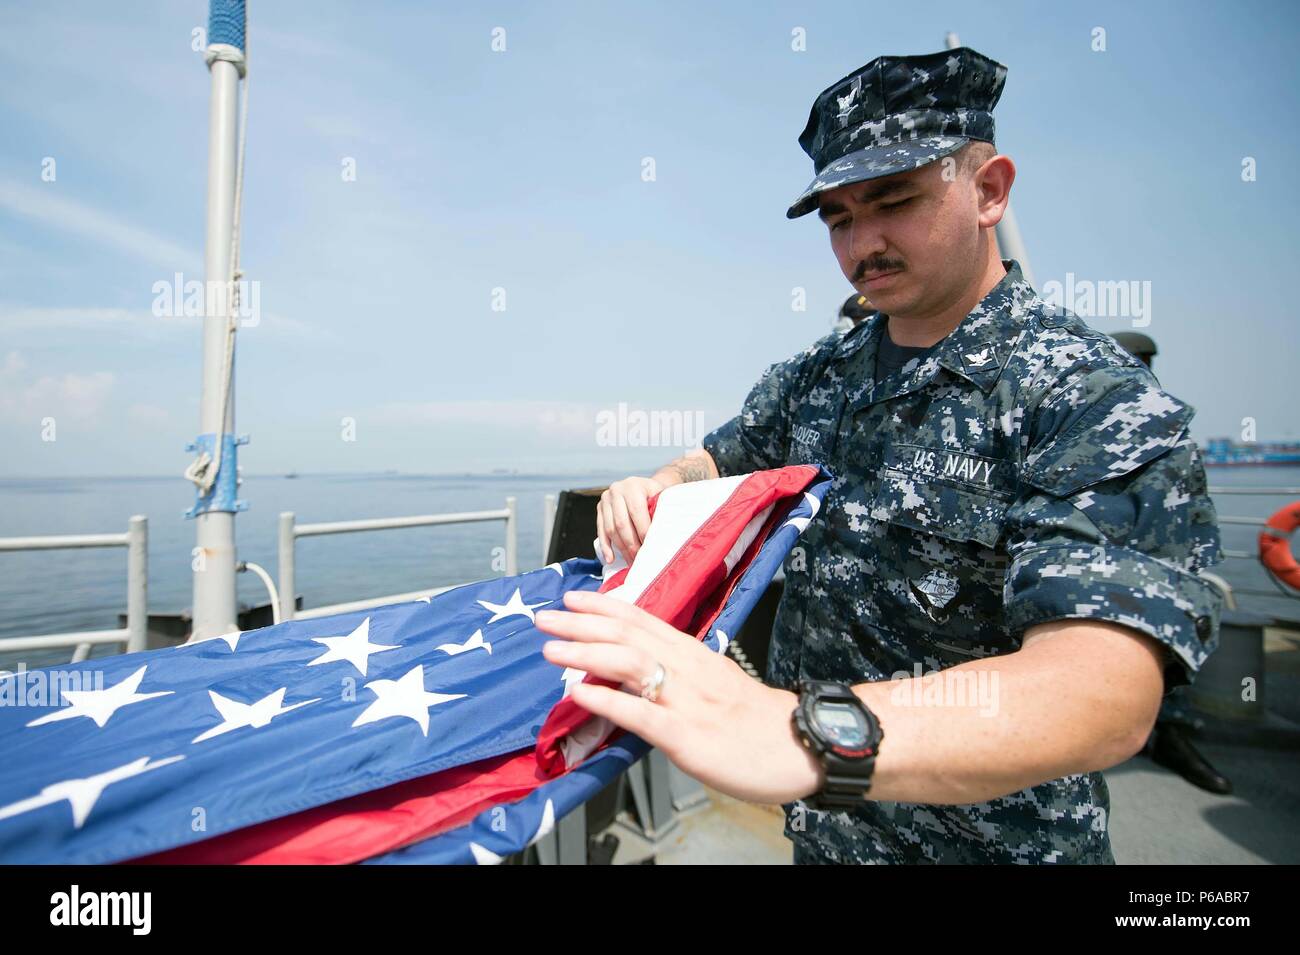 160528-N-EH218-063  MANILA, Philippines (May 28, 2016) – Electronics Technician 3rd Class Ryan Glover, from Lockhart, Texas, folds the national ensign after getting underway and shifting colors aboard the guided-missile cruiser USS Mobile Bay (CG 53). Providing a ready force supporting security and stability in the Indo-Asia-Pacific, Mobile Bay is operating as part of the John C. Stennis Strike Group and Great Green Fleet on a regularly scheduled 7th Fleet deployment. (U.S. Navy photo by Mass Communication Specialist 2nd Class Ryan J. Batchelder/Released) Stock Photo